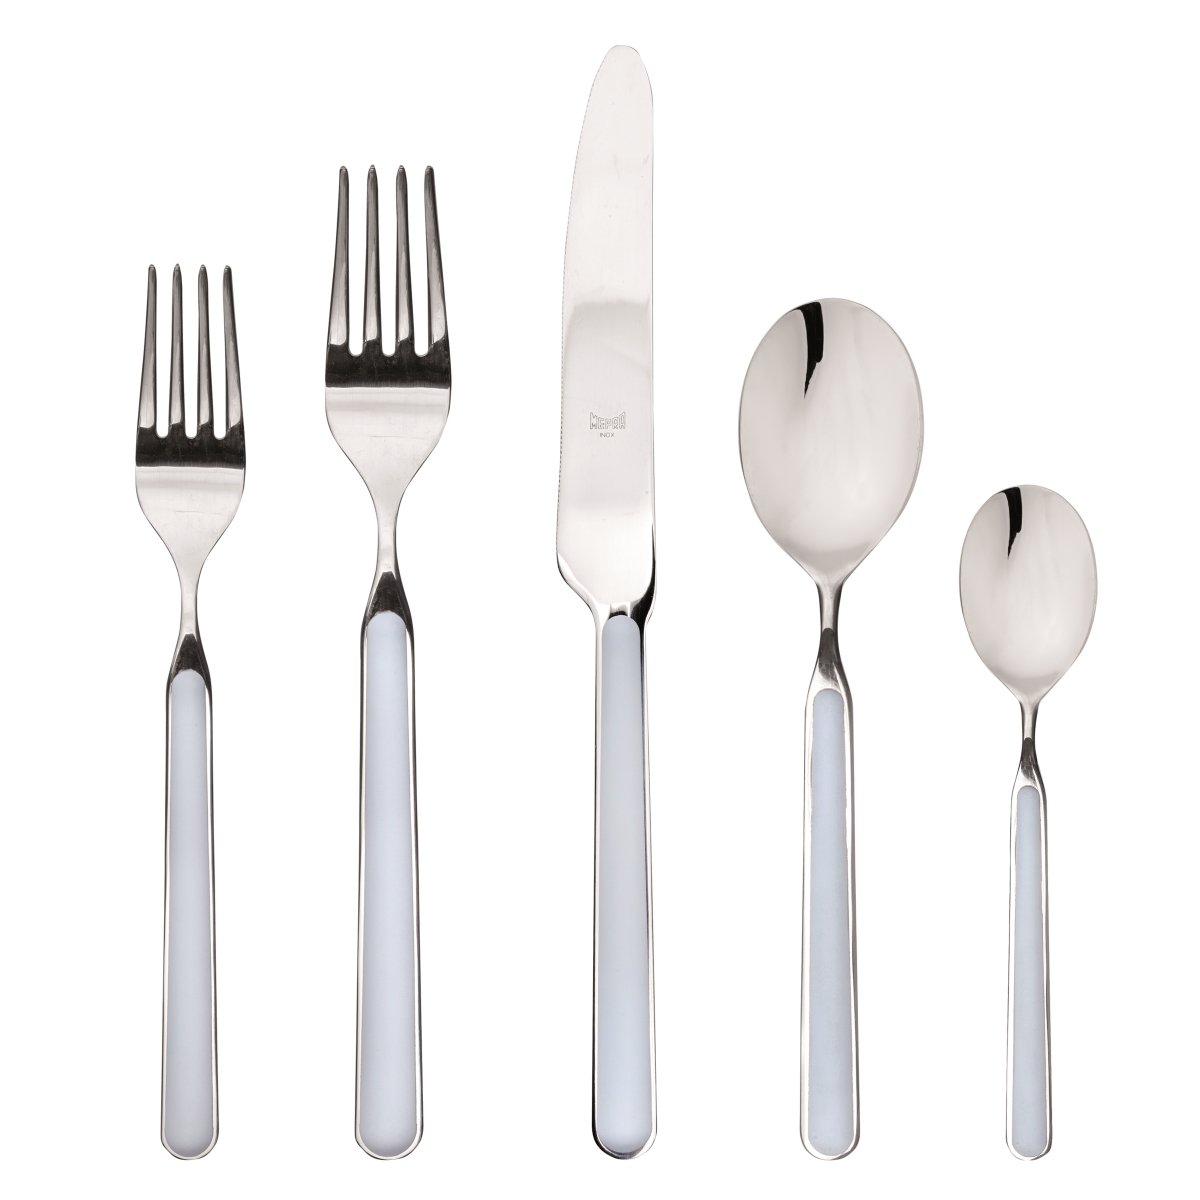 10a622005 Stainless Steel Fantasia Place Set, Light Blue - 5 Piece